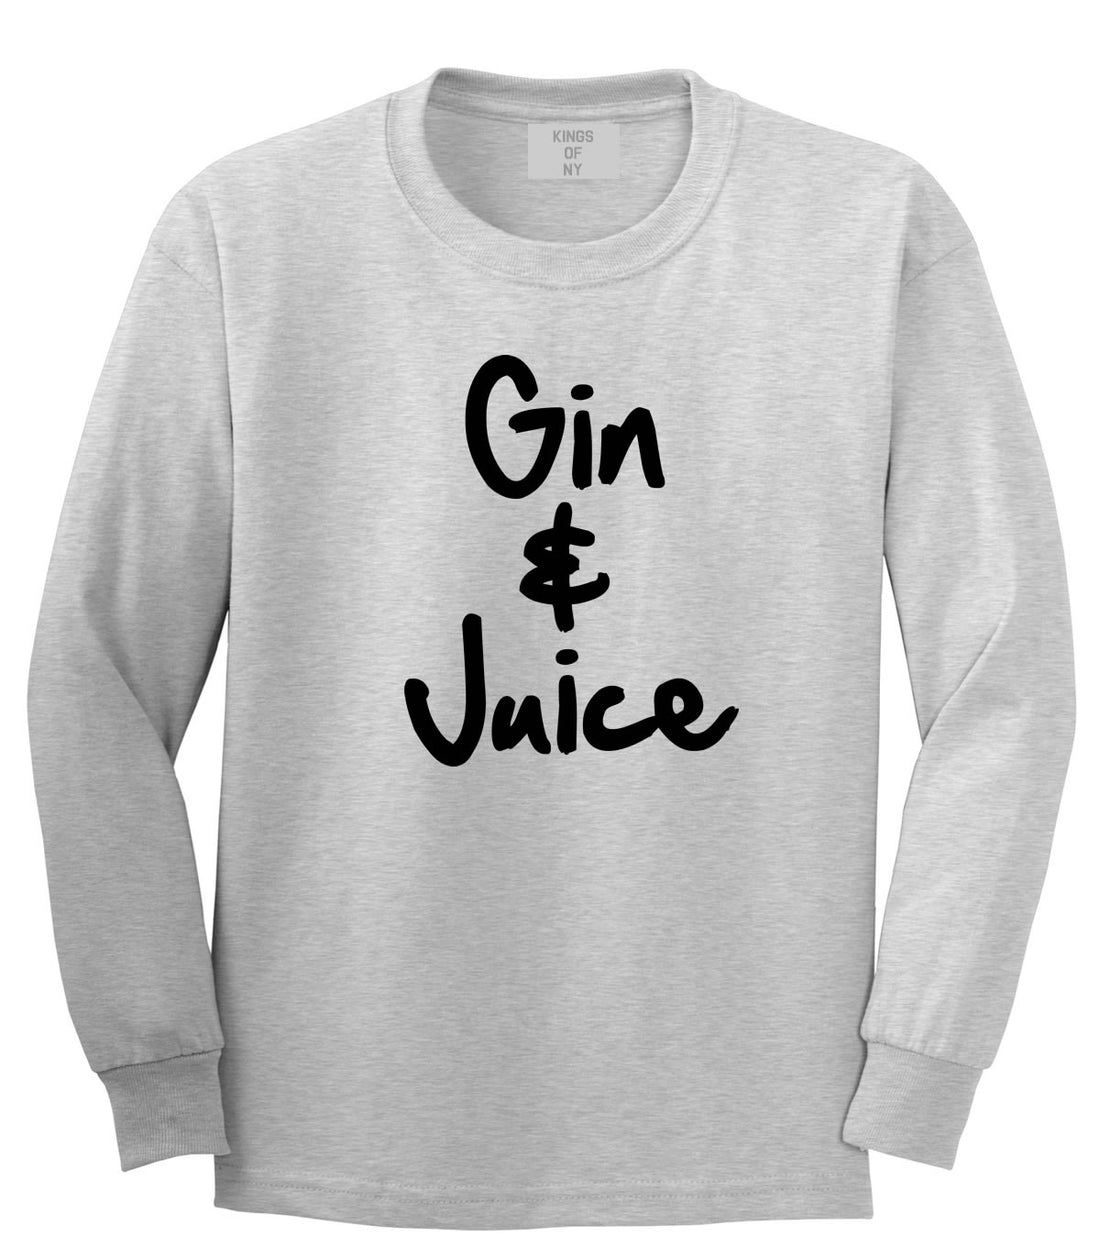 Kings Of NY Gin and Juice Long Sleeve T-Shirt in Grey